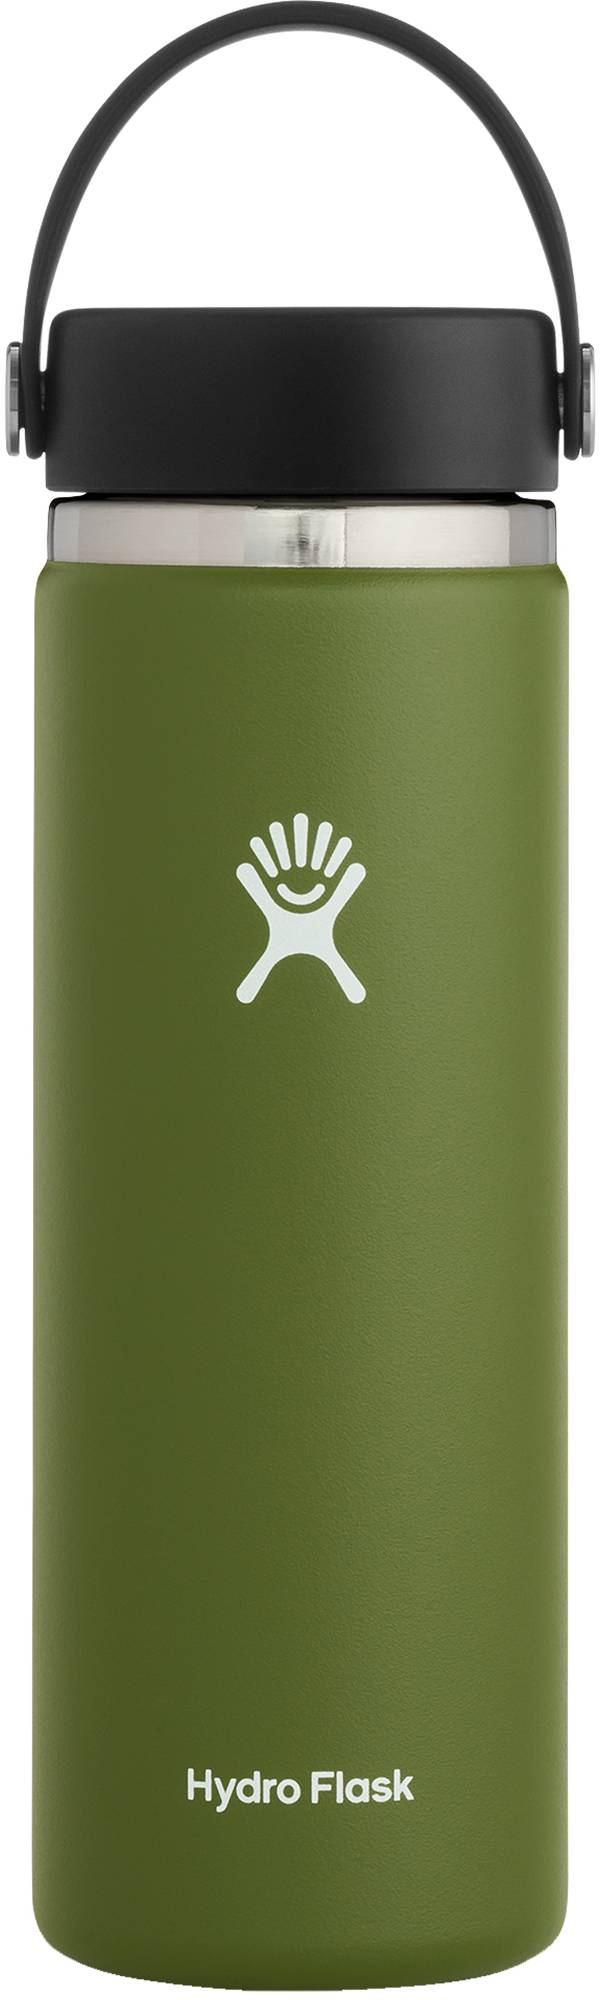 Hydro Flask 20 oz. Wide Mouth Bottle product image